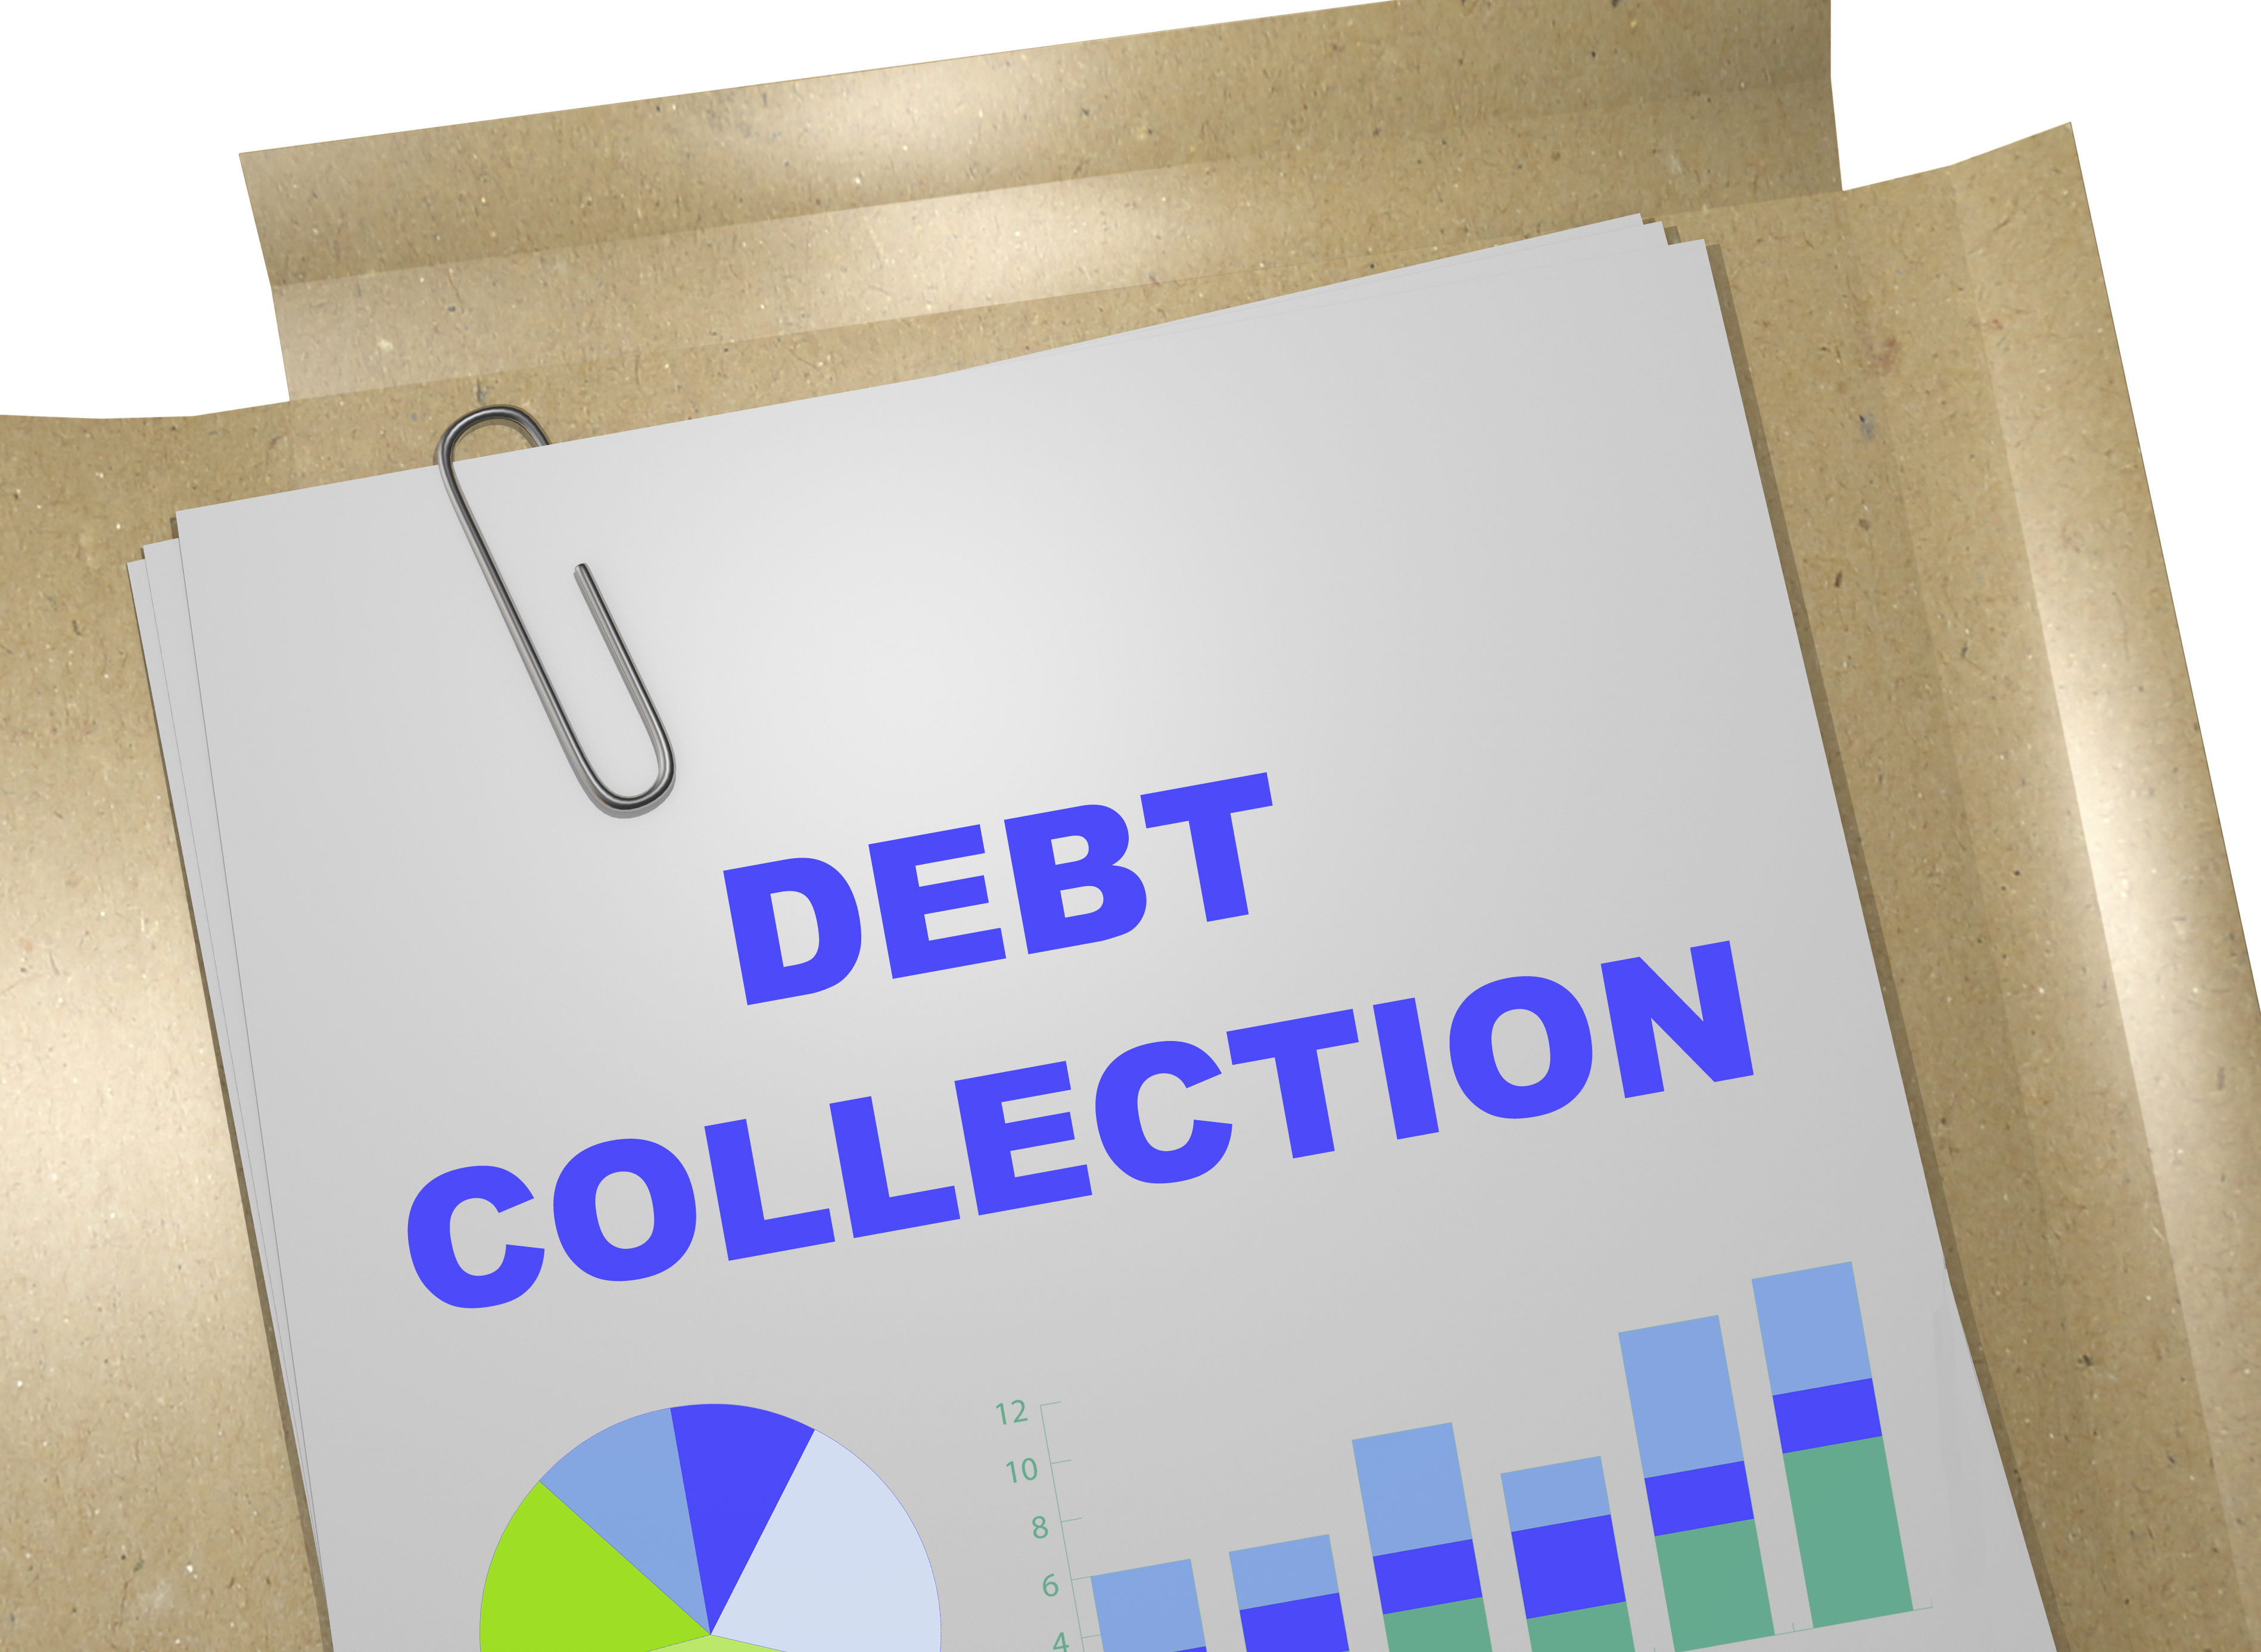 What Are Debt Collector Inspections?